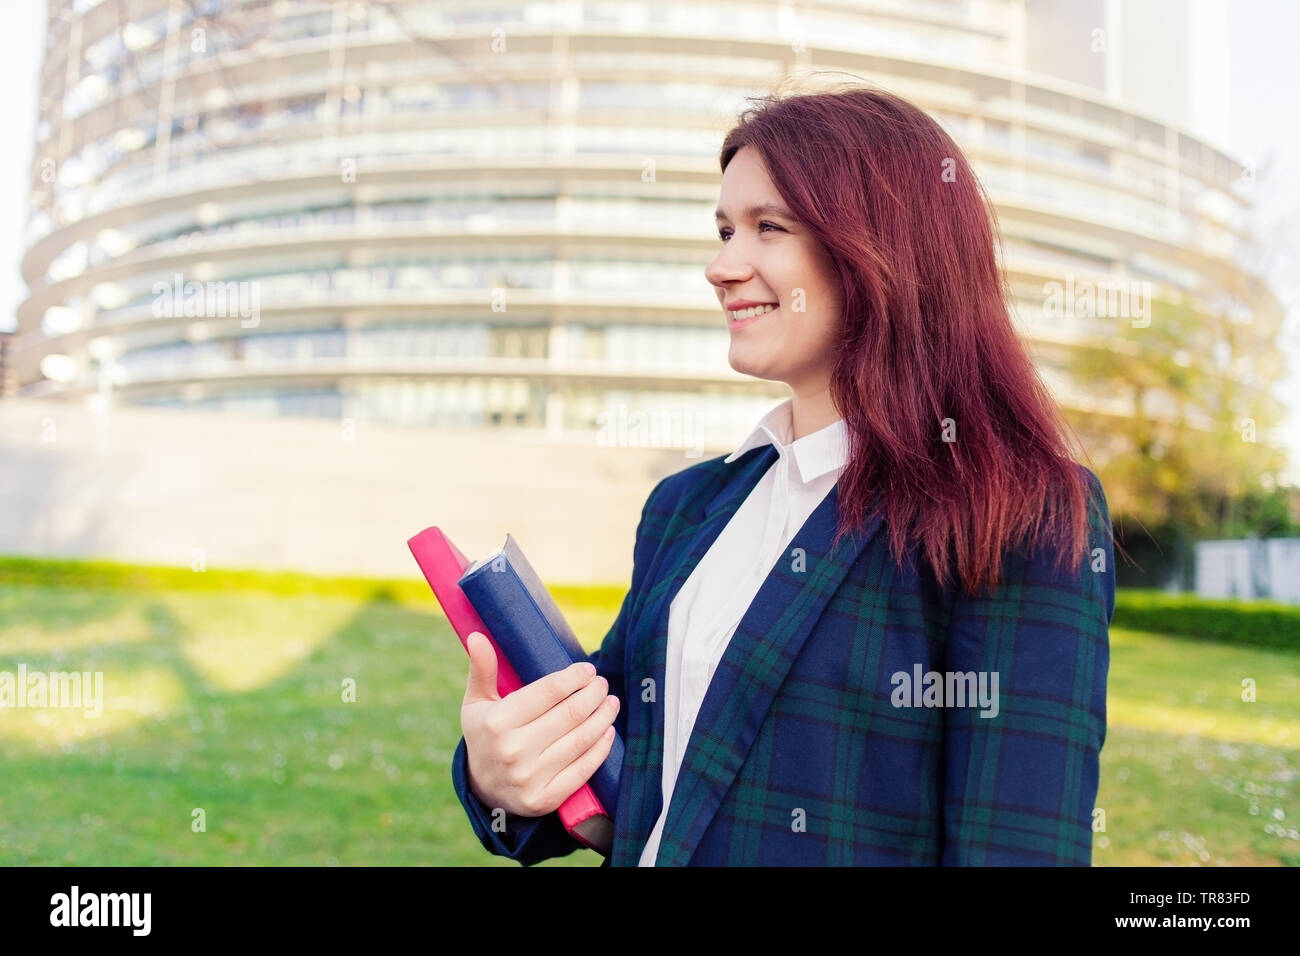 Student girl outdoor in campus smiling happy going back to university. Caucsian female college or university student. Caucasian young woman holding bo Stock Photo